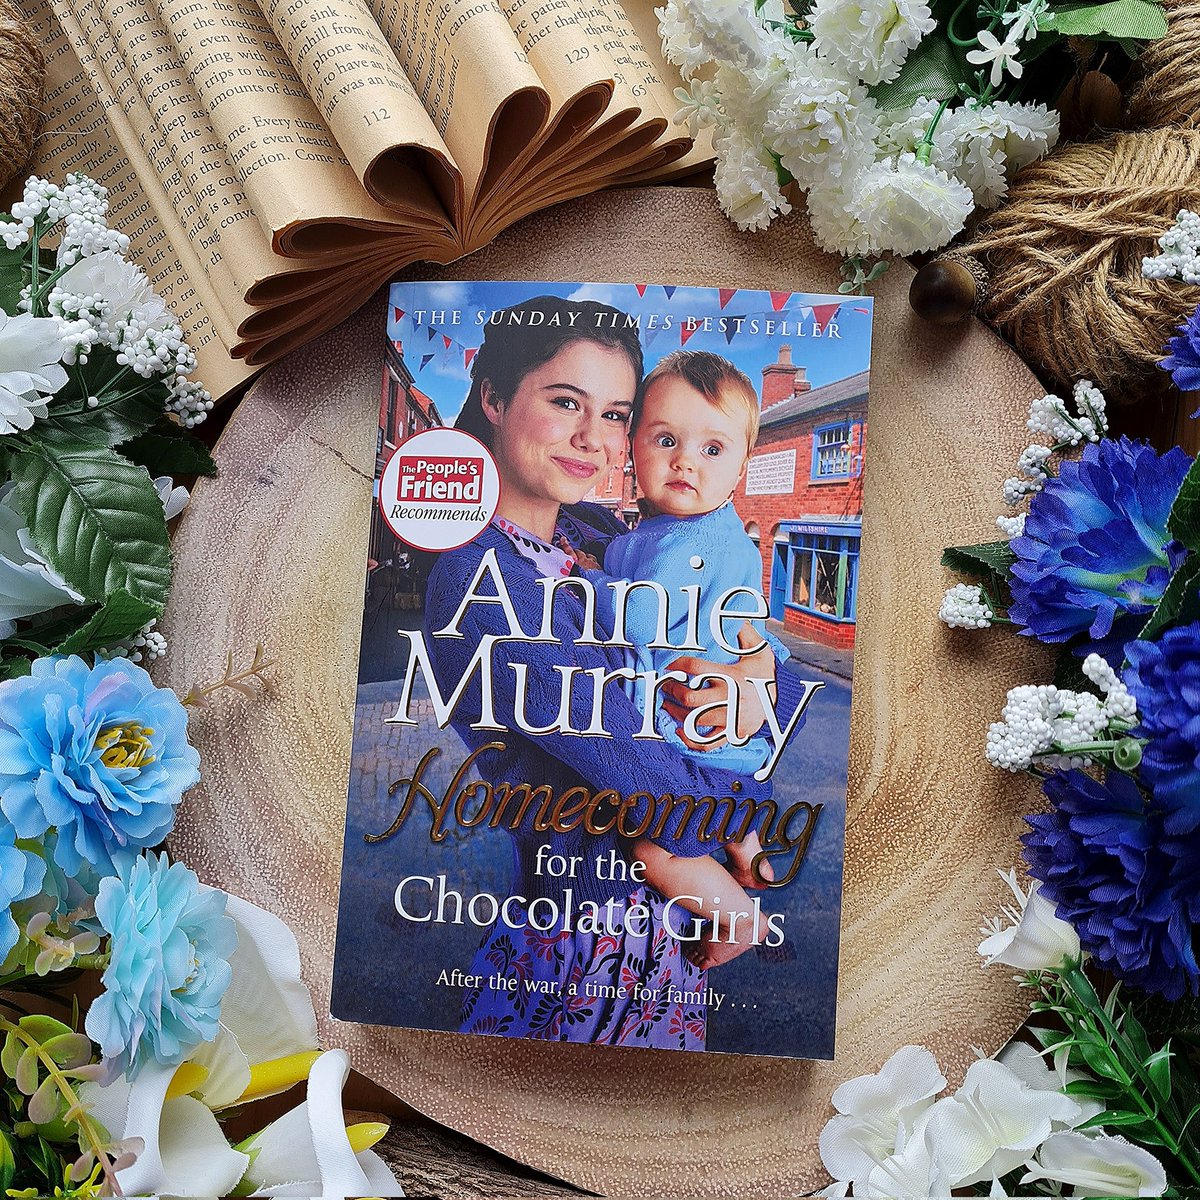 Homecoming for the Chocolate Girls by Annie Murray The gritty and heartwarming Birmingham Today is my stop on the #HomecomingfortheChocolateGirls by #AnnieMurray #blogtour My review instagram.com/p/C5xbzlfAV-D/… #panmacmillan #HistoricalSaga #historicalfiction #HistoricalRomance